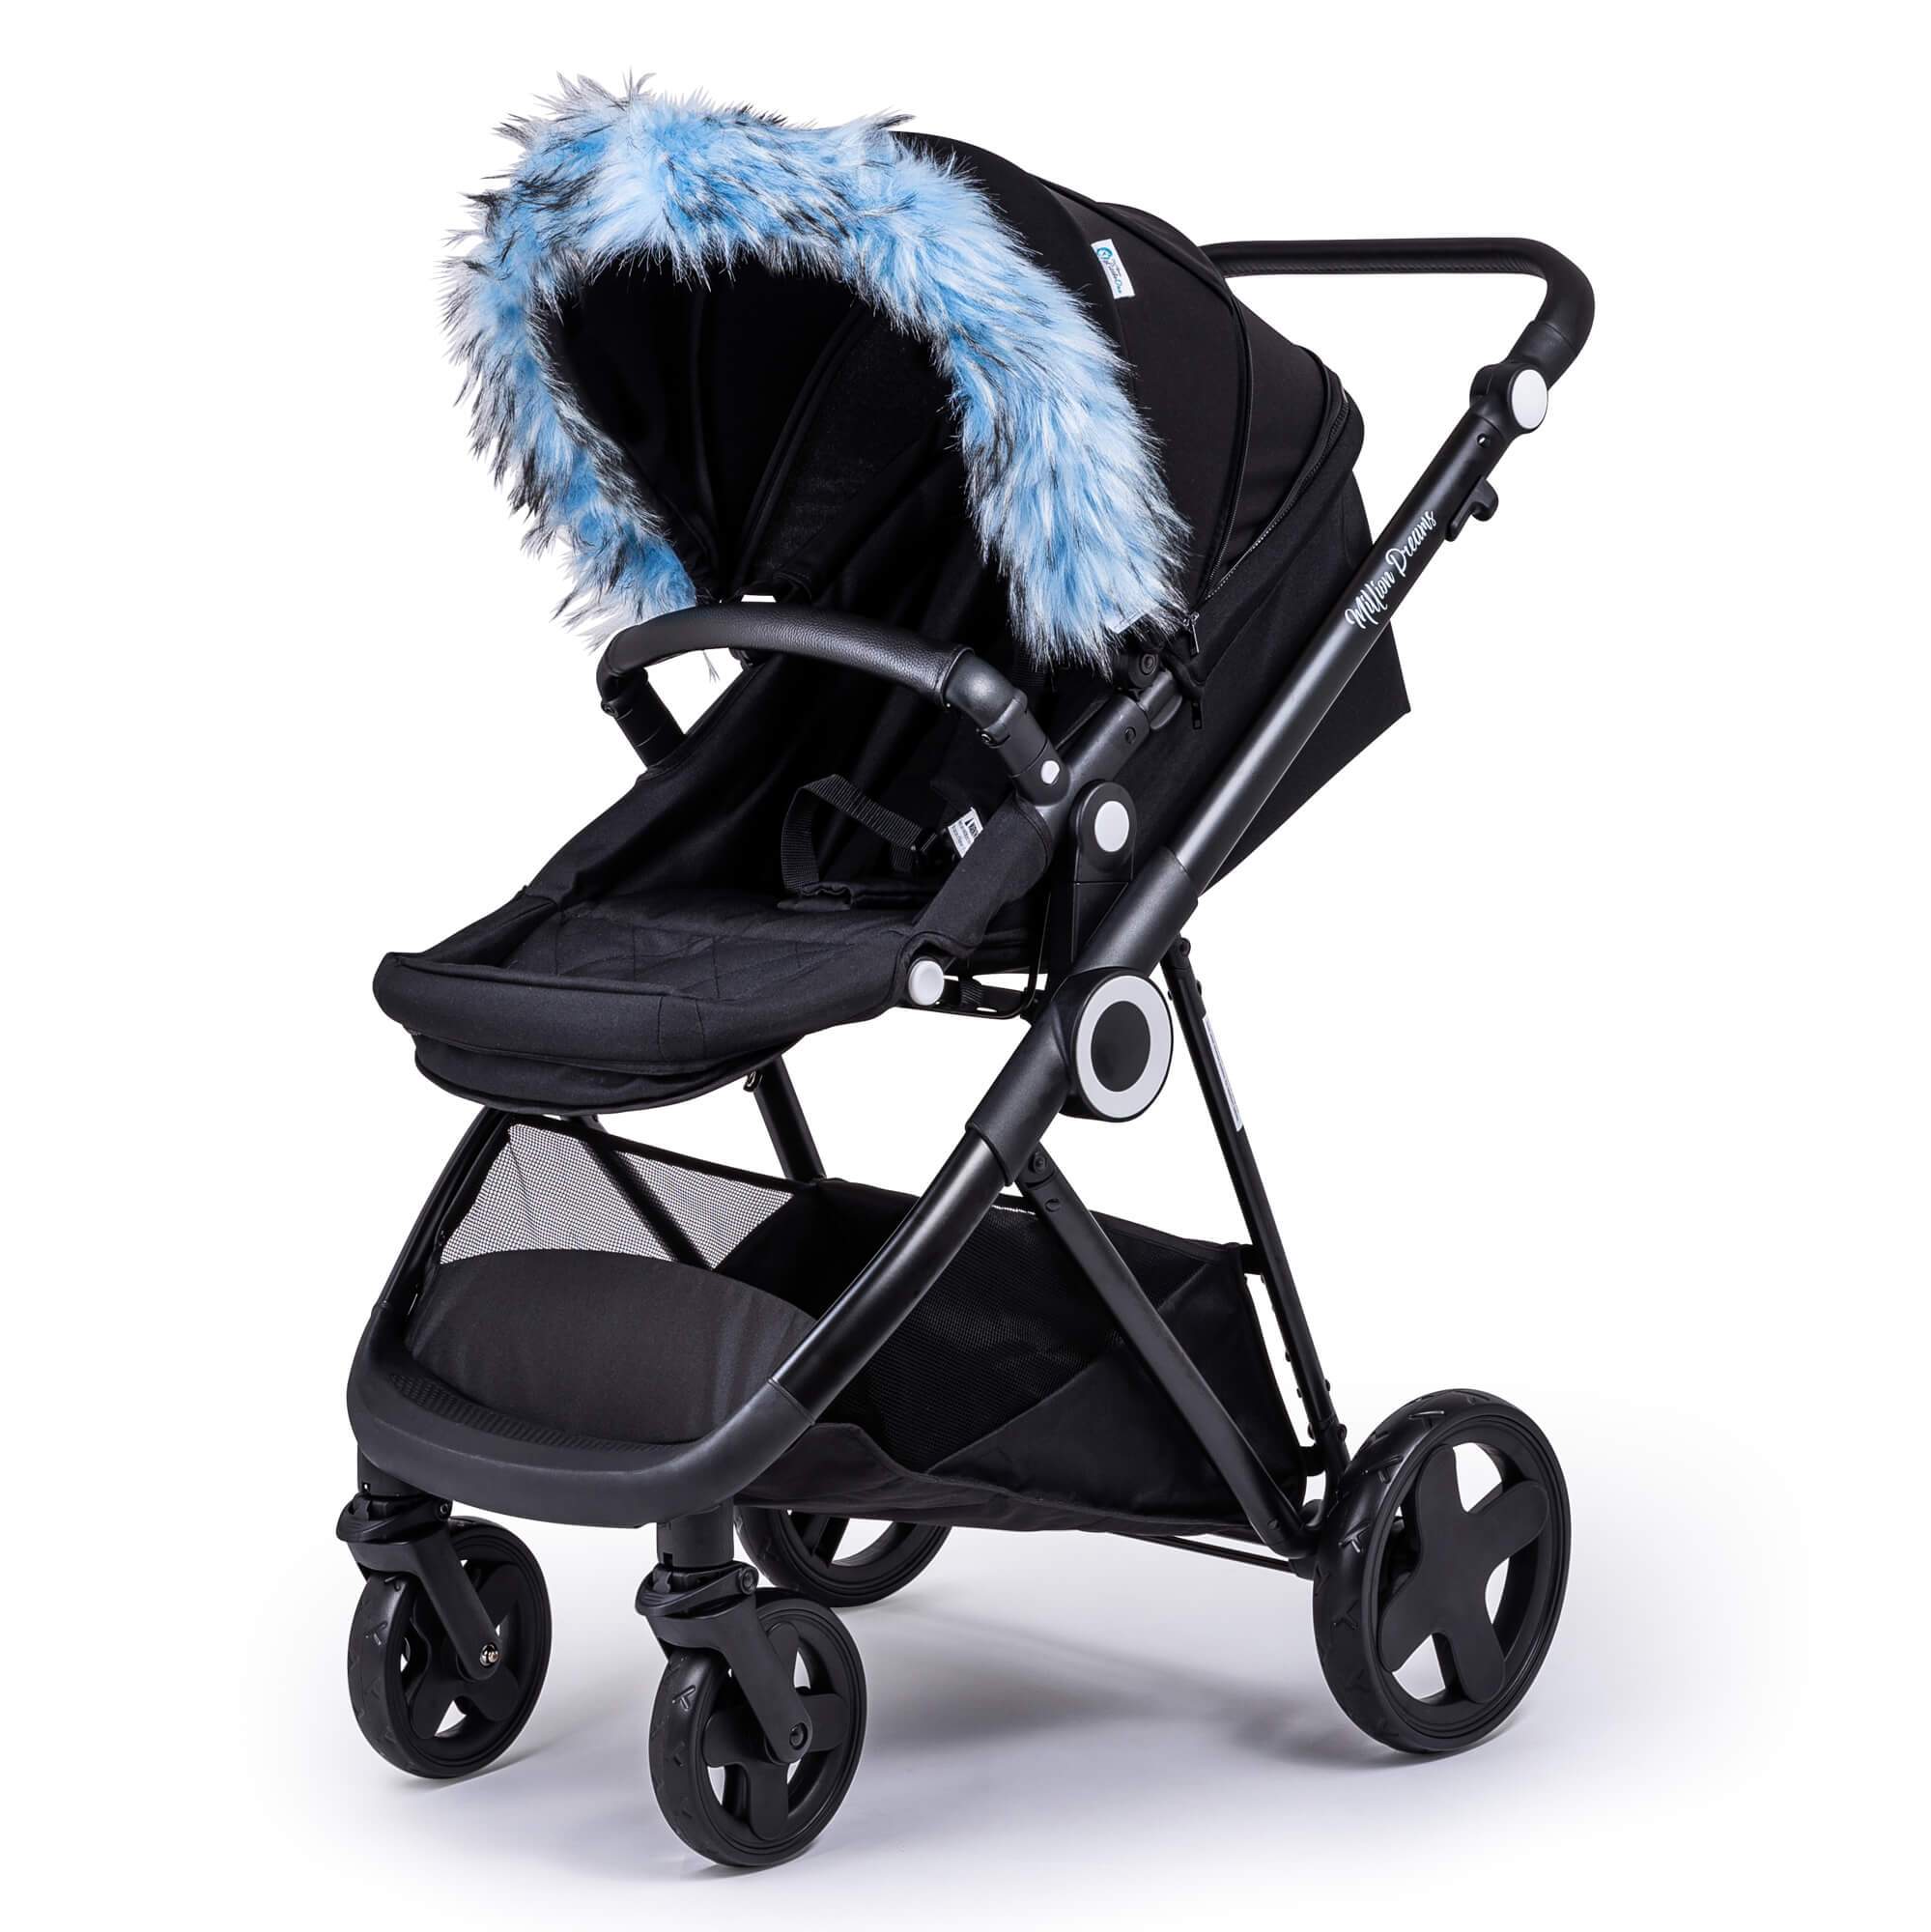 Pram Fur Hood Trim Attachment for Pushchair Compatible with Egg - Light Blue / Fits All Models | For Your Little One